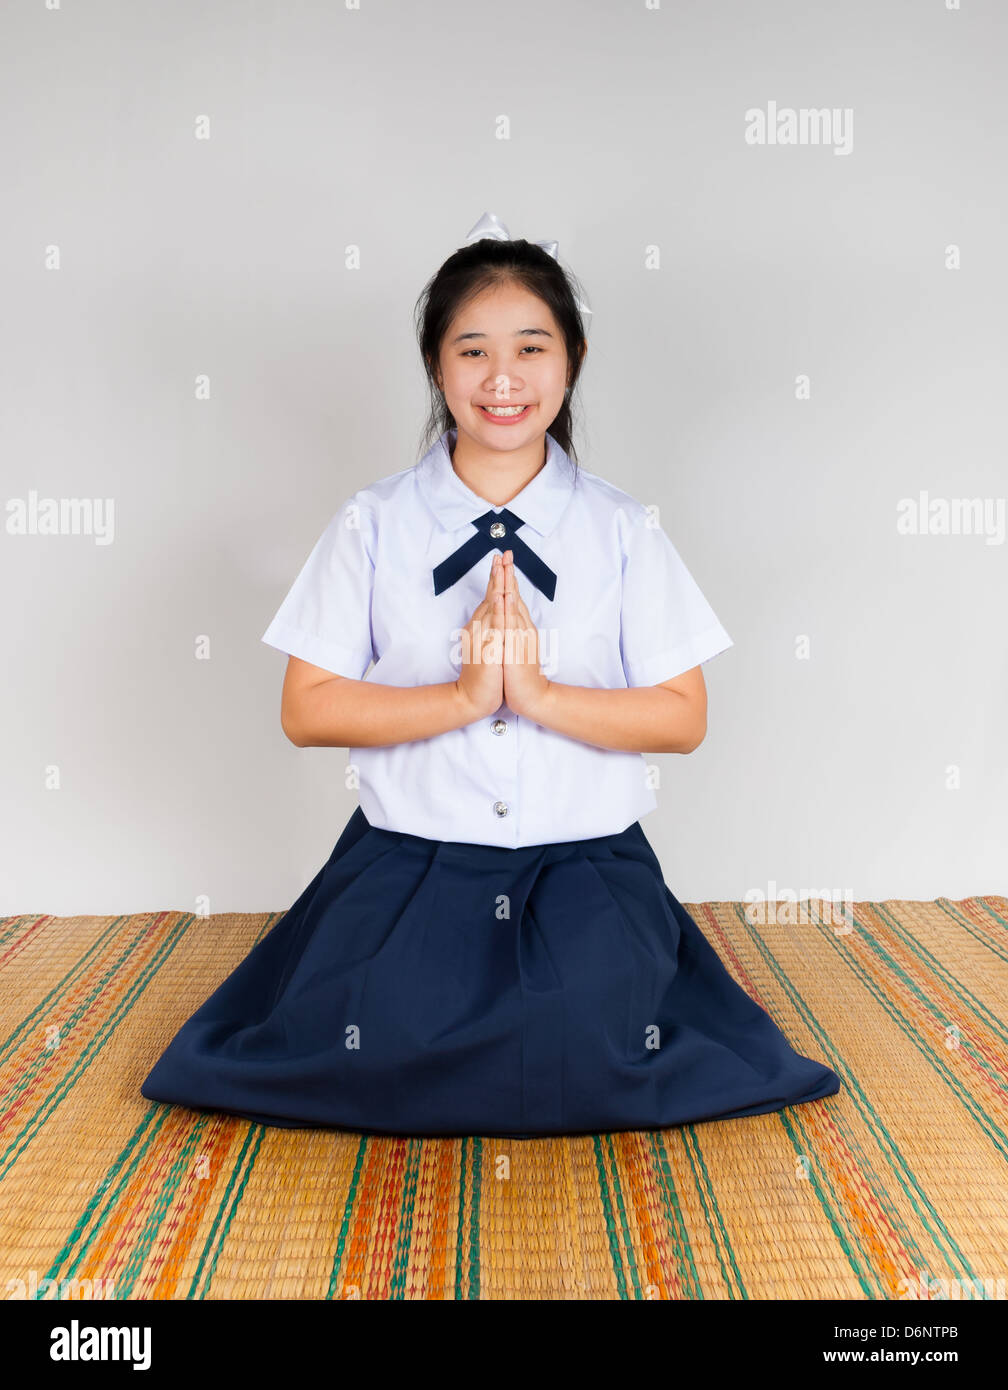 High School Asian Thai Student is paying obeisance Stock Photo